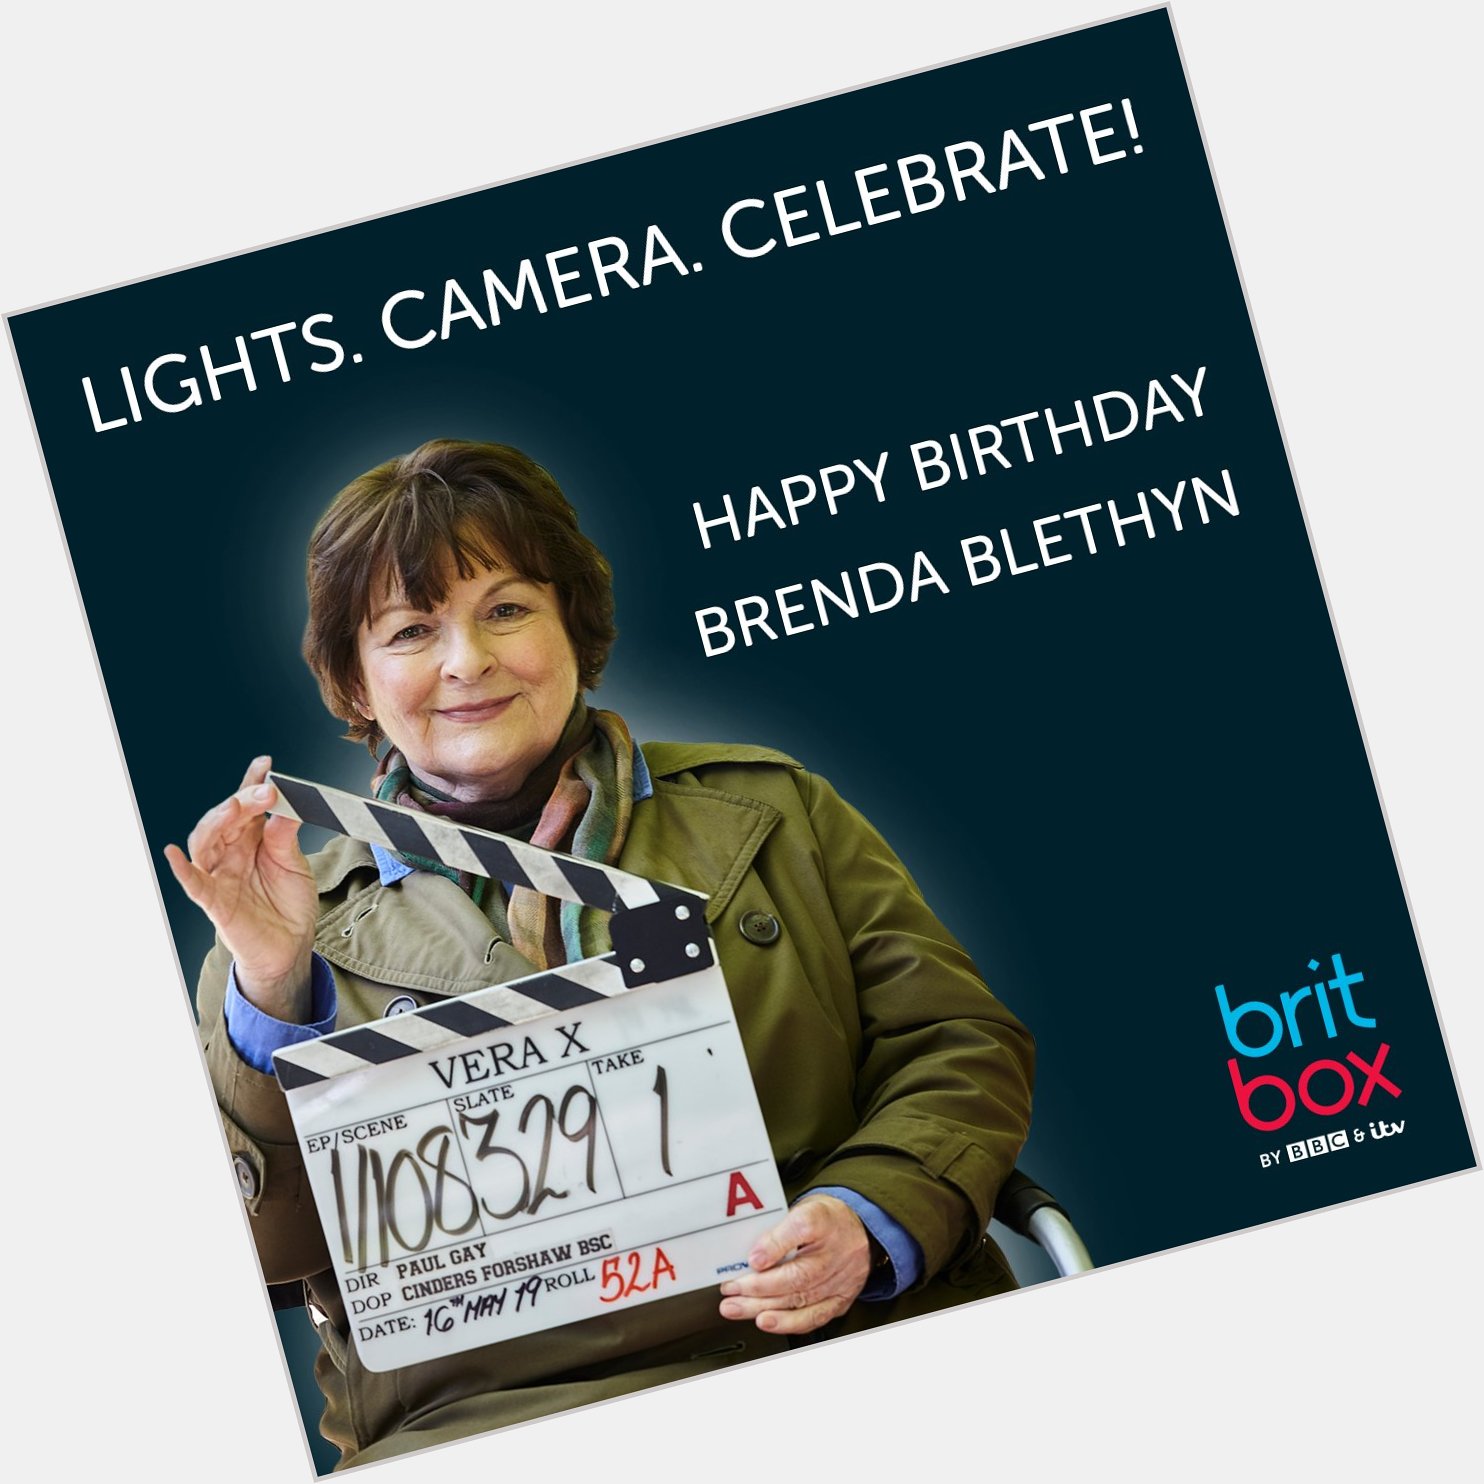 Happy Birthday to Brenda Blethyn, our Queen of sleuthing! 